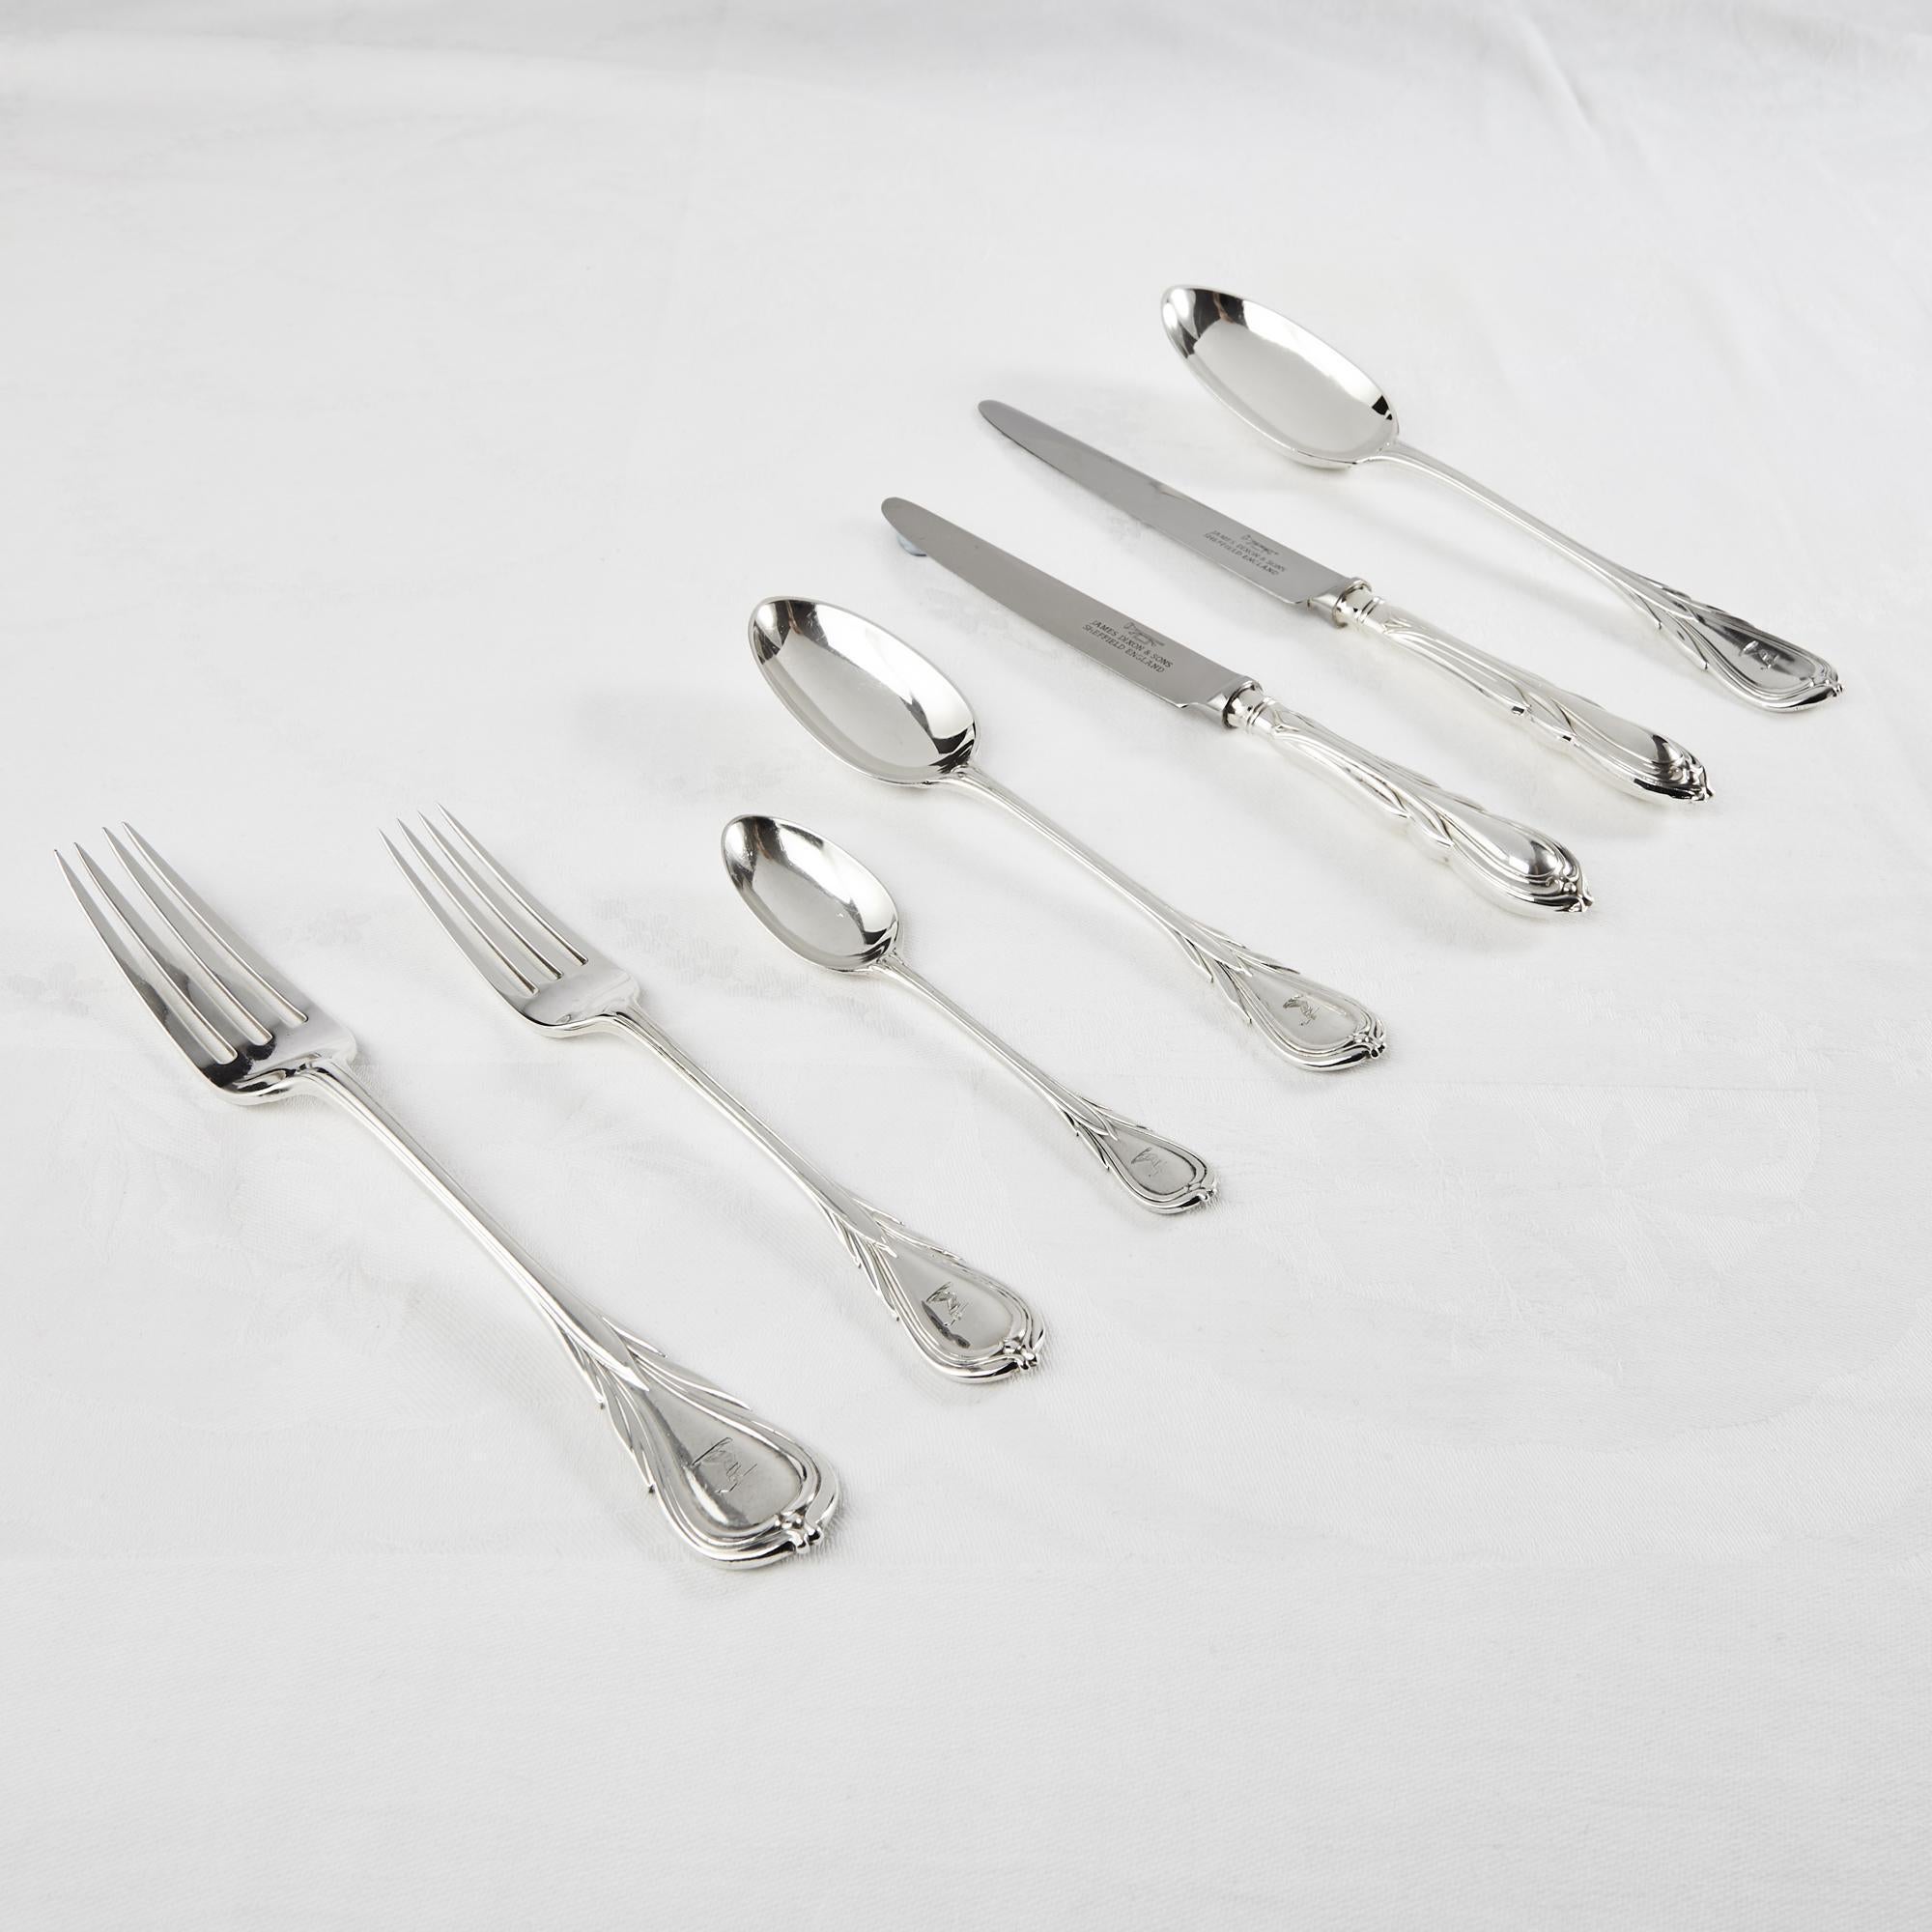 One Date and Maker, Hand Forged Lily Silver Cutlery 3